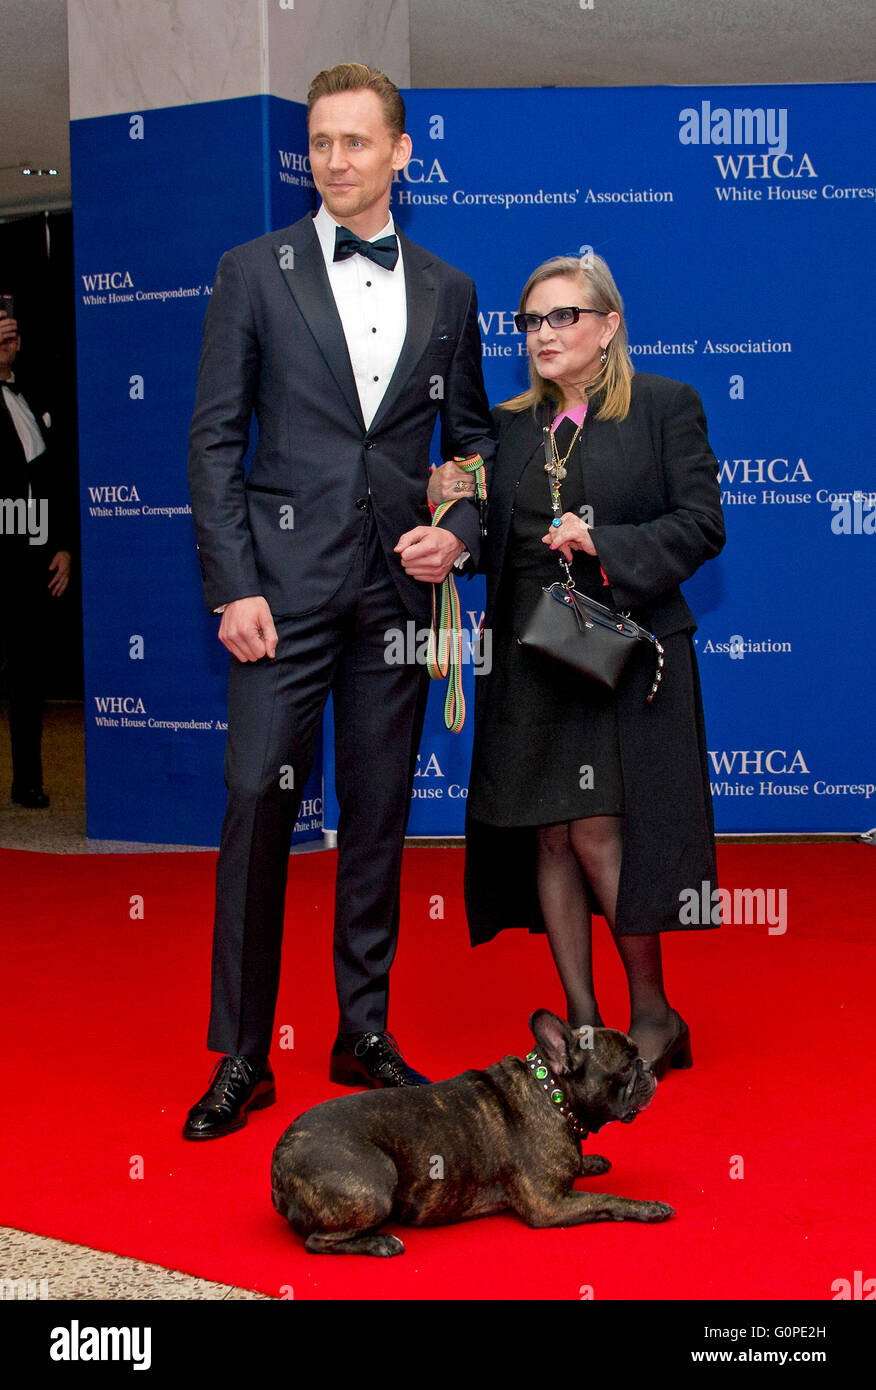 Actors Tom Hiddleston, left, and Carrie Fisher with her dog Gary arrive for the 2016 White House Correspondents Association Annual Dinner at the Washington Hilton Hotel on Saturday, April 30, 2016. Credit: Ron Sachs / CNP (RESTRICTION: NO New York or New Jersey Newspapers or newspapers within a 75 mile radius of New York City) - NO WIRE SERVICE - Stock Photo